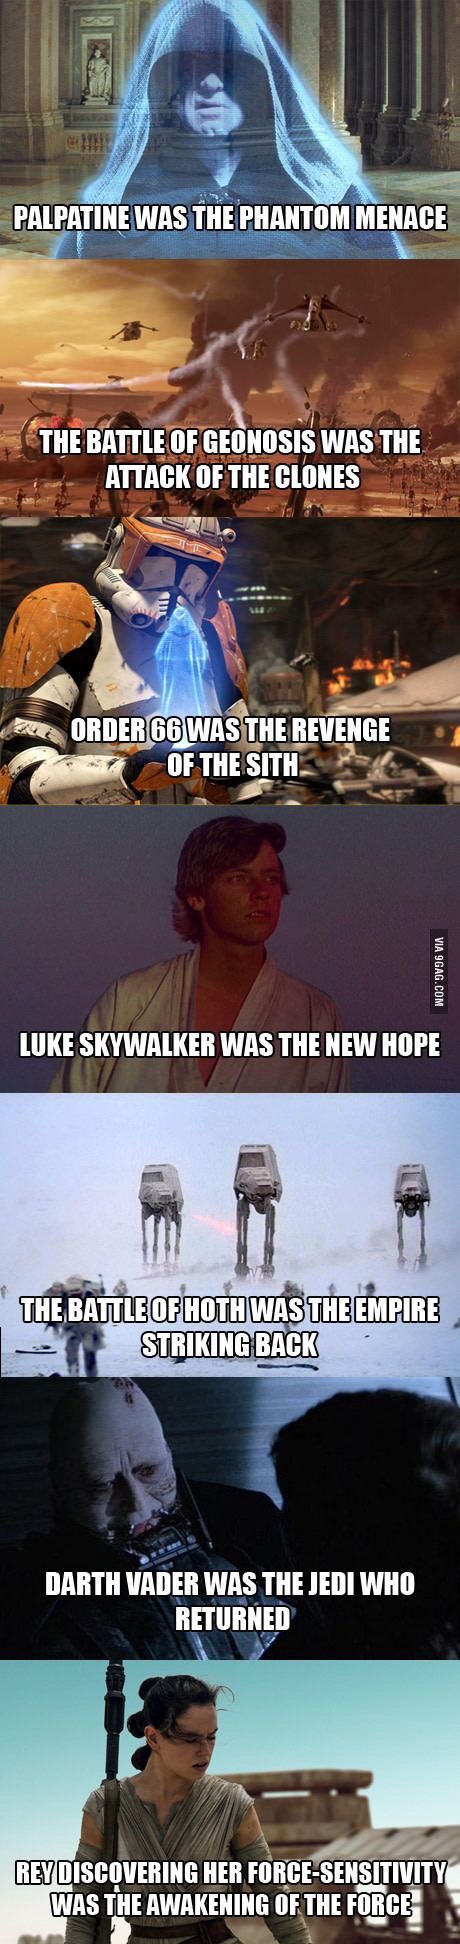 star wars title meanings - Palpatine Was The Phantom Menace The Battle Of Geonosis Was The Attack Of The Clones Rac. Order 66 Was The Revenge Of The Sith Via 9GAG.Com Luke Skywalker Was The New Hope The Battle Of Hoth Was The Empire Striking Back Darth Va